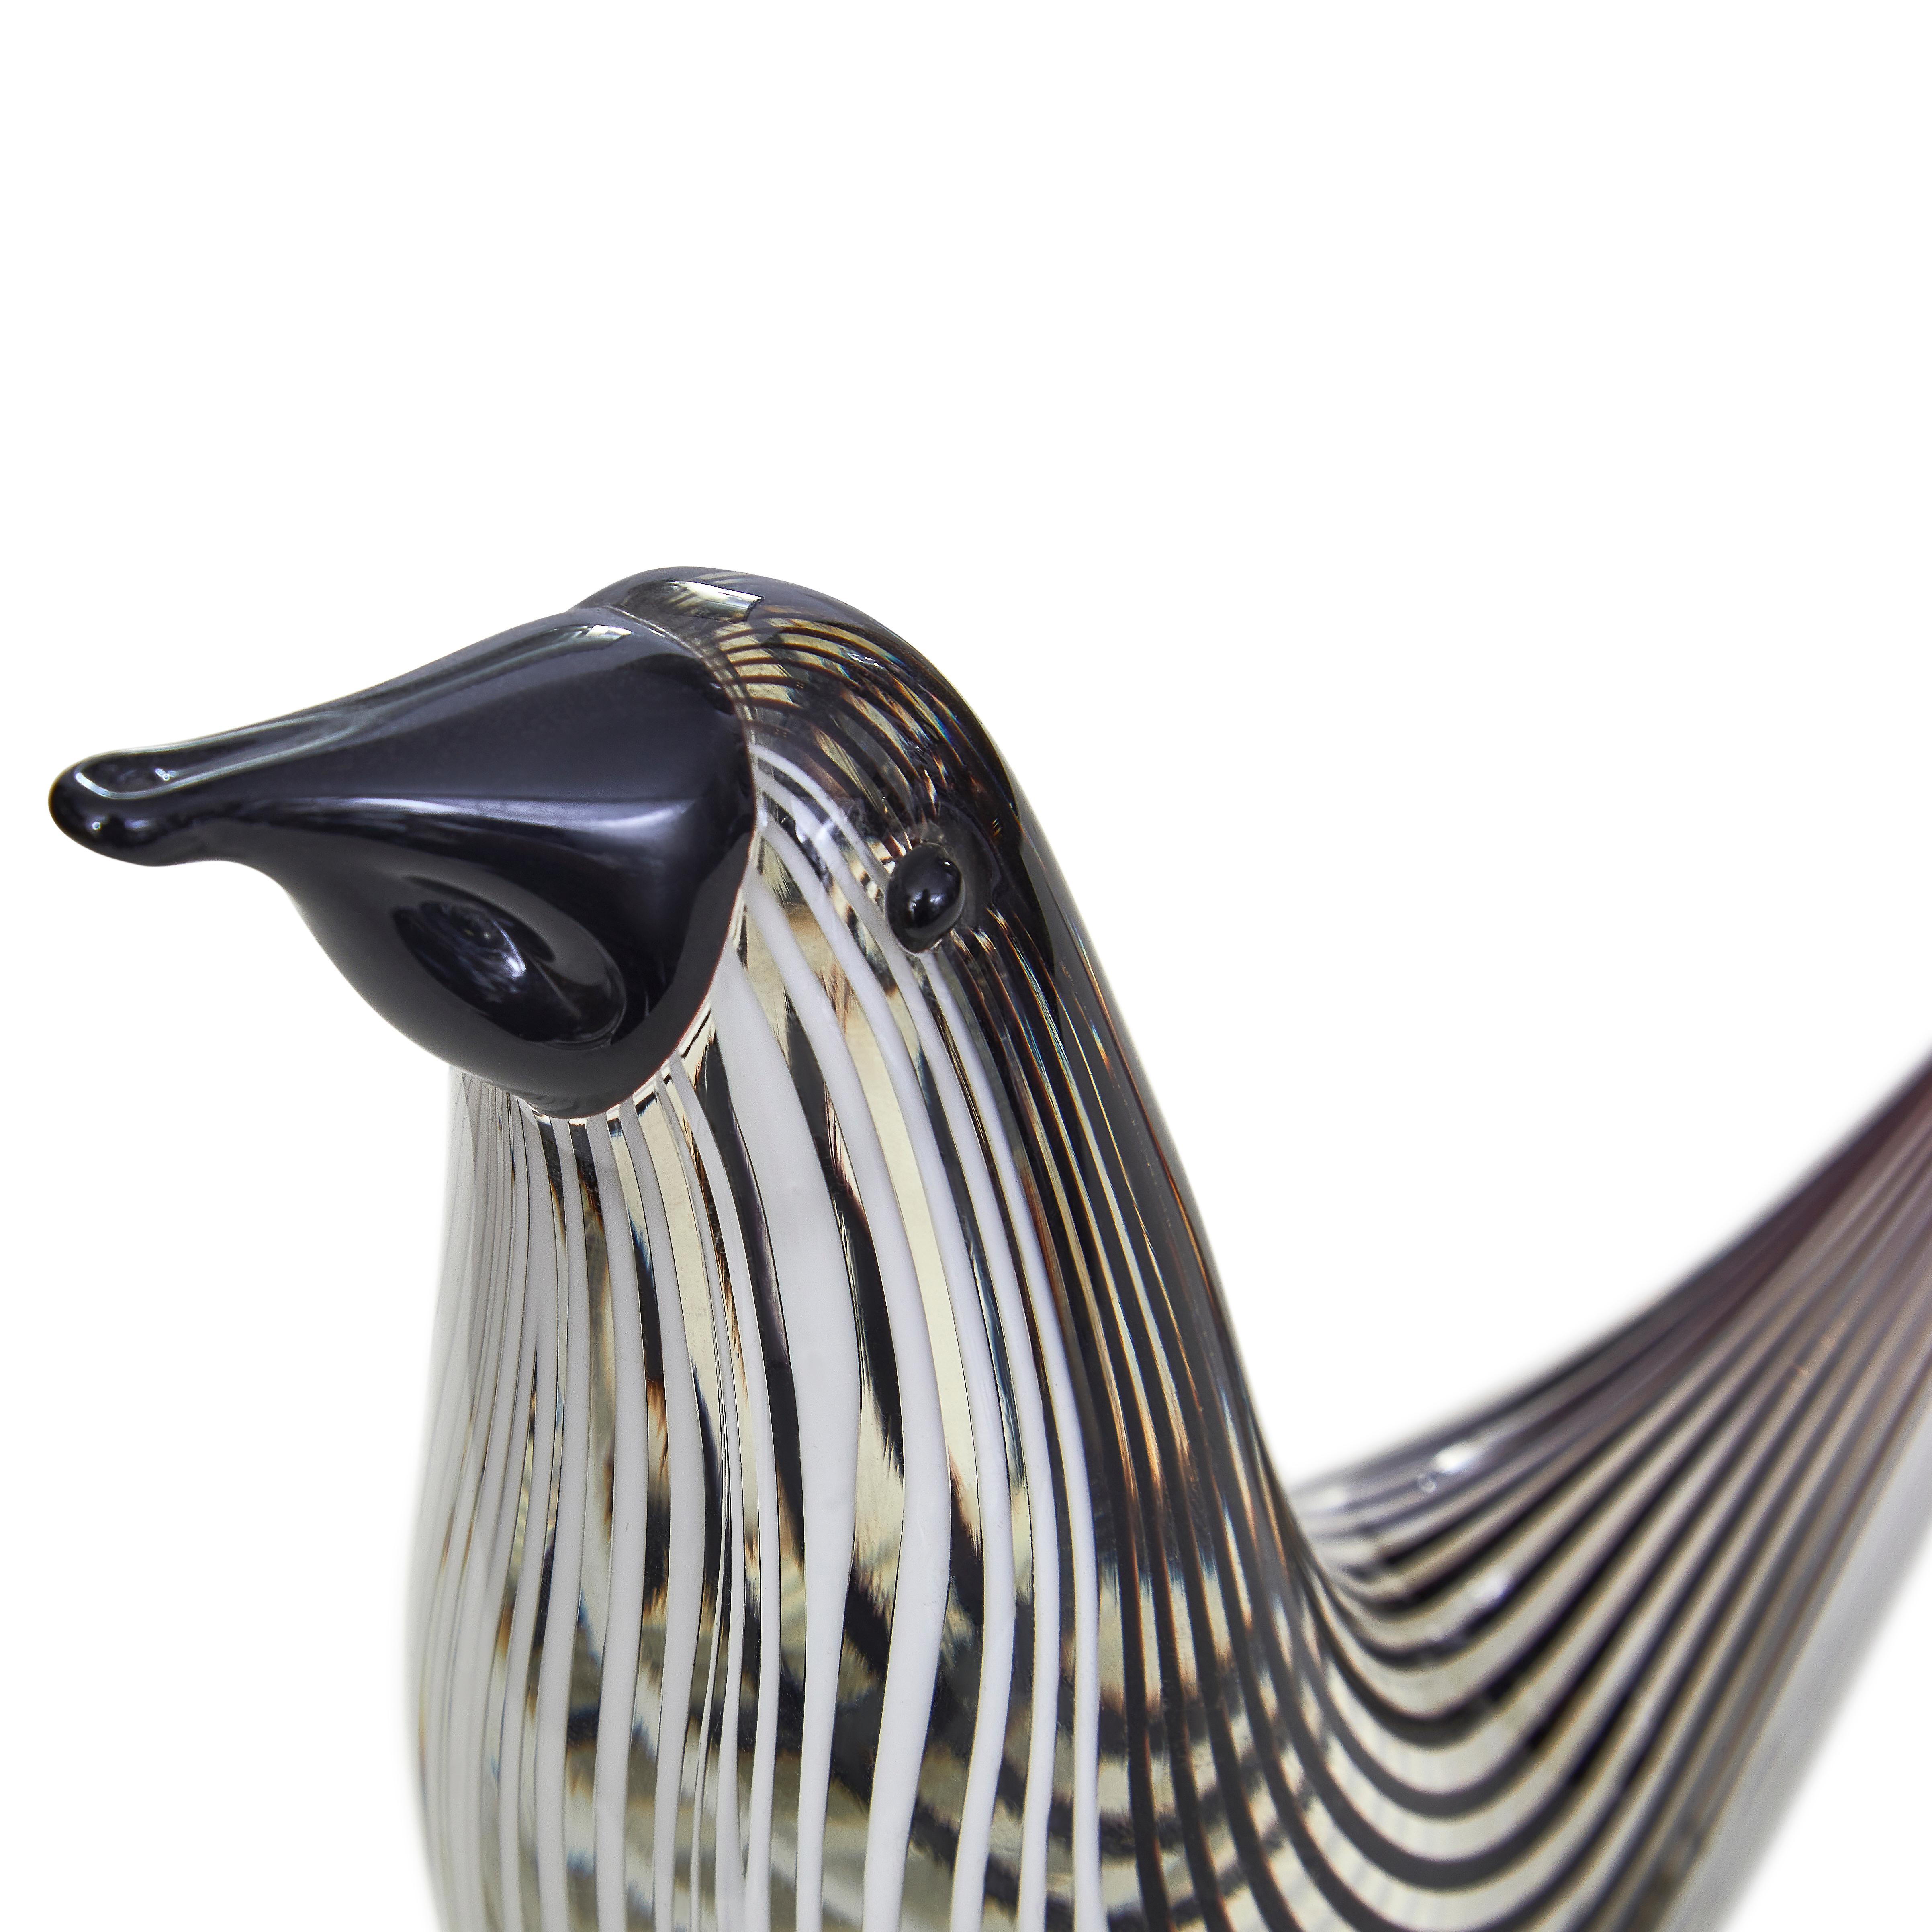 Elegant simple glass bird using the Murano Filigrana technique. The back of the bird has black glass rods and the front white, the beak and eyes were applied later in black glass.
Cloured crystal rods are prepared beforehand which are heated in the